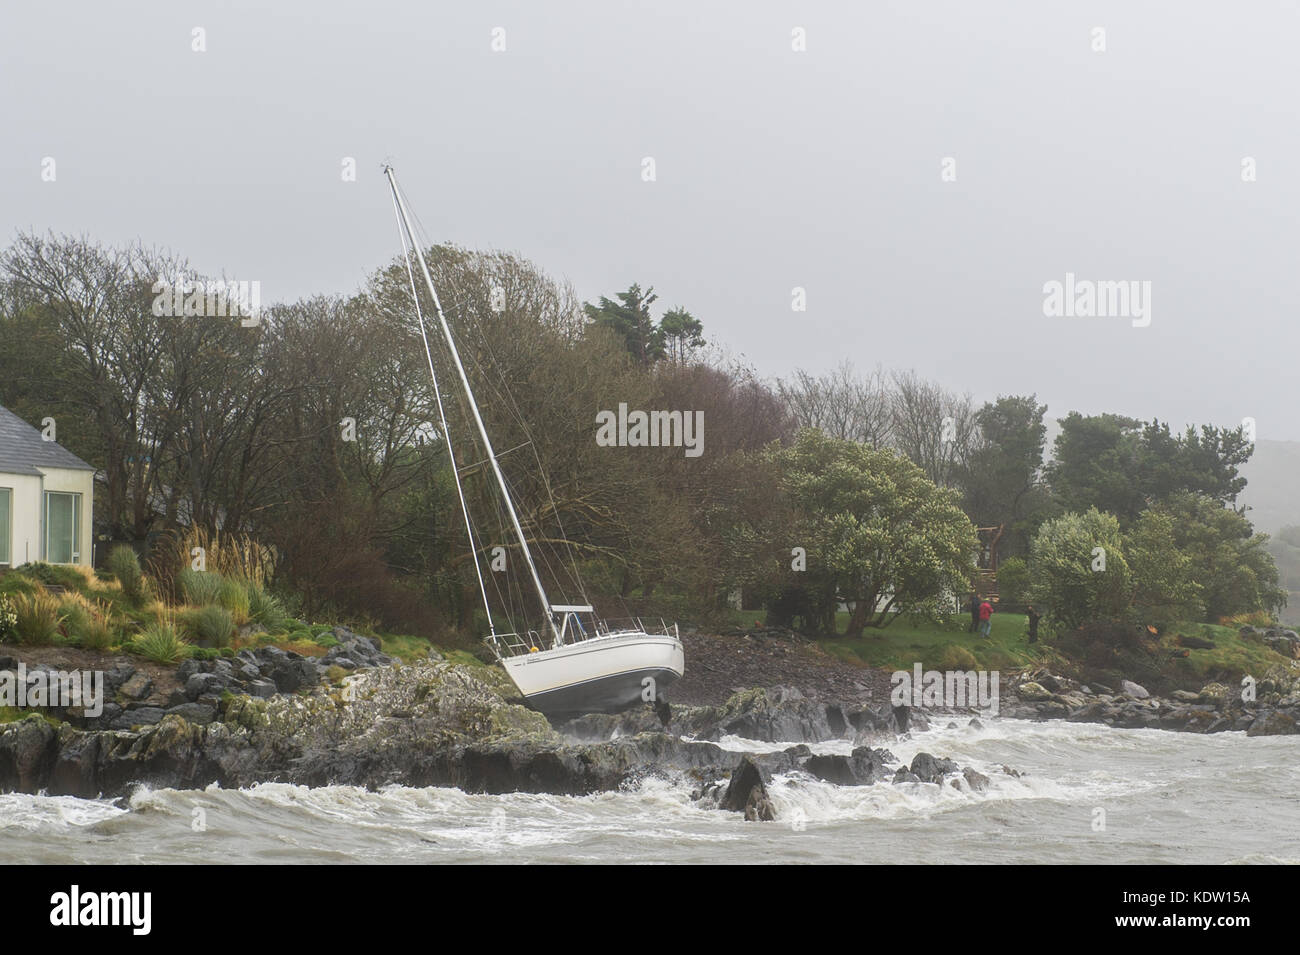 Schull, Ireland 16th Oct, 2017.  Ex-Hurricane Ophelia hits Schull, Ireland with winds of 80kmh and gusts of 130kmh.  Major structural damage is expected as the worst is yet to come. A yacht flounders on rocks after she slipped her moorings due to extremely high winds. Credit: Andy Gibson/Alamy Live News. Stock Photo